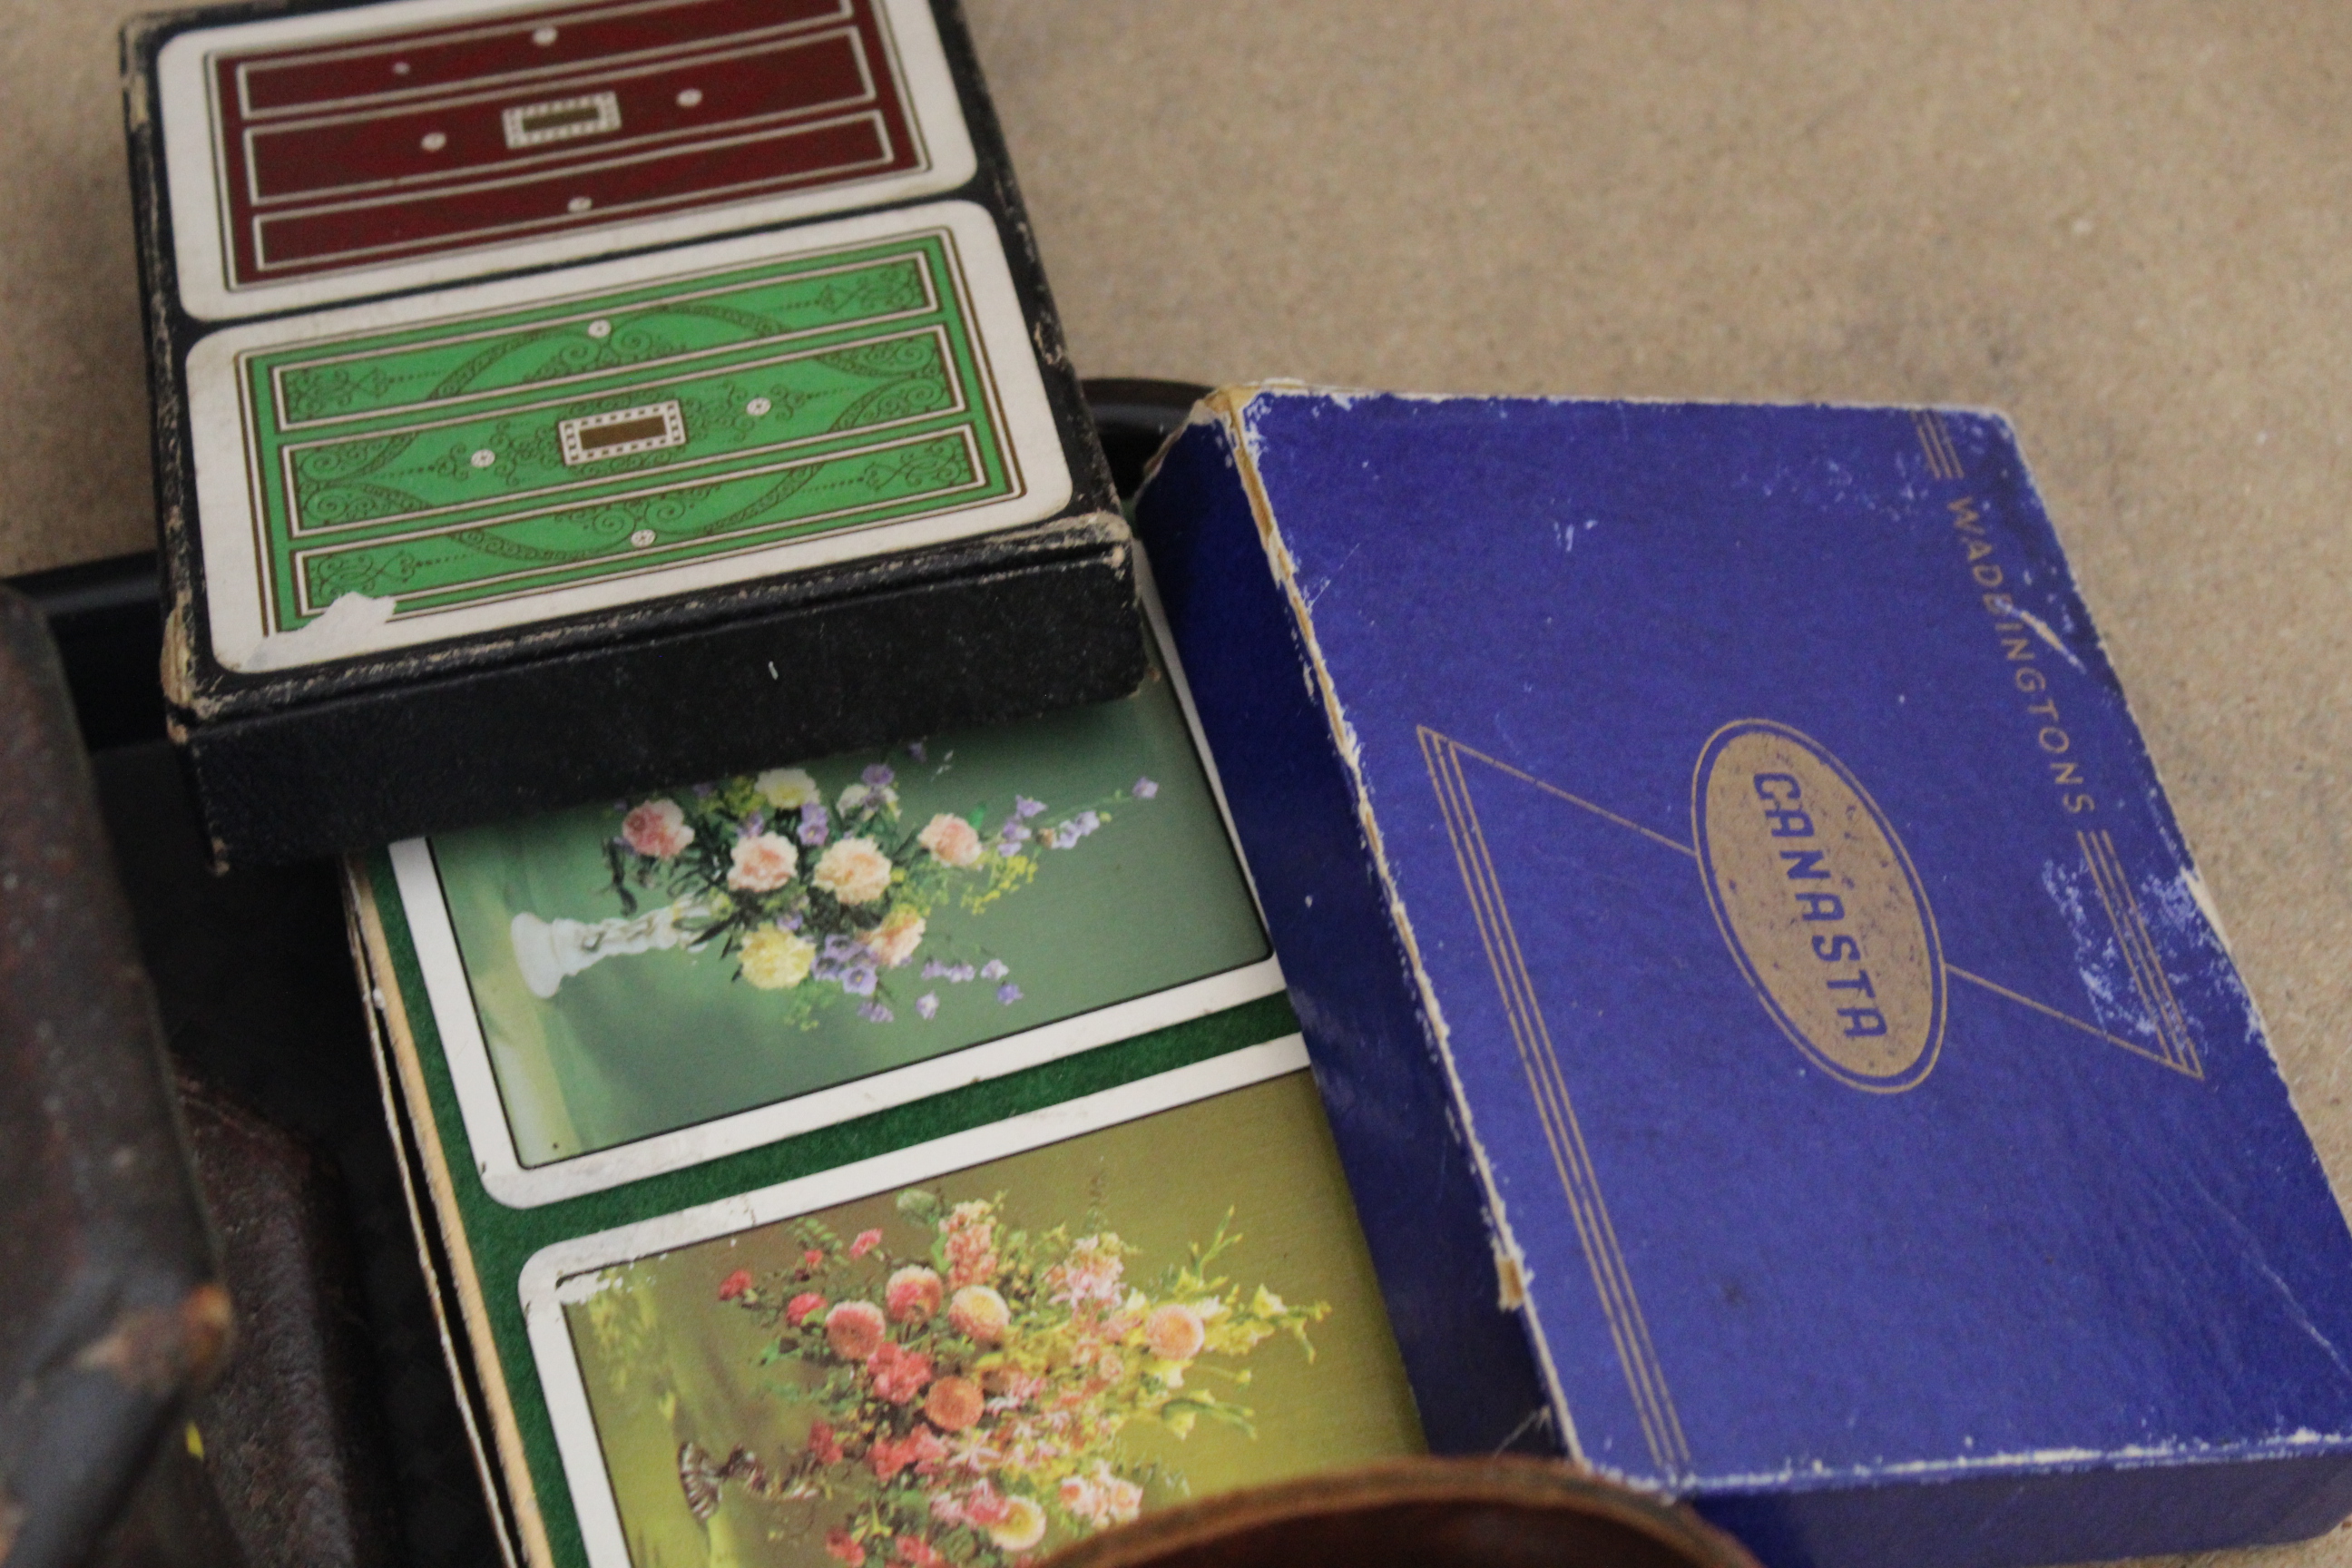 Three double sets of vintage playing cards, a games chip dispenser, leather dice shaker, - Image 2 of 3